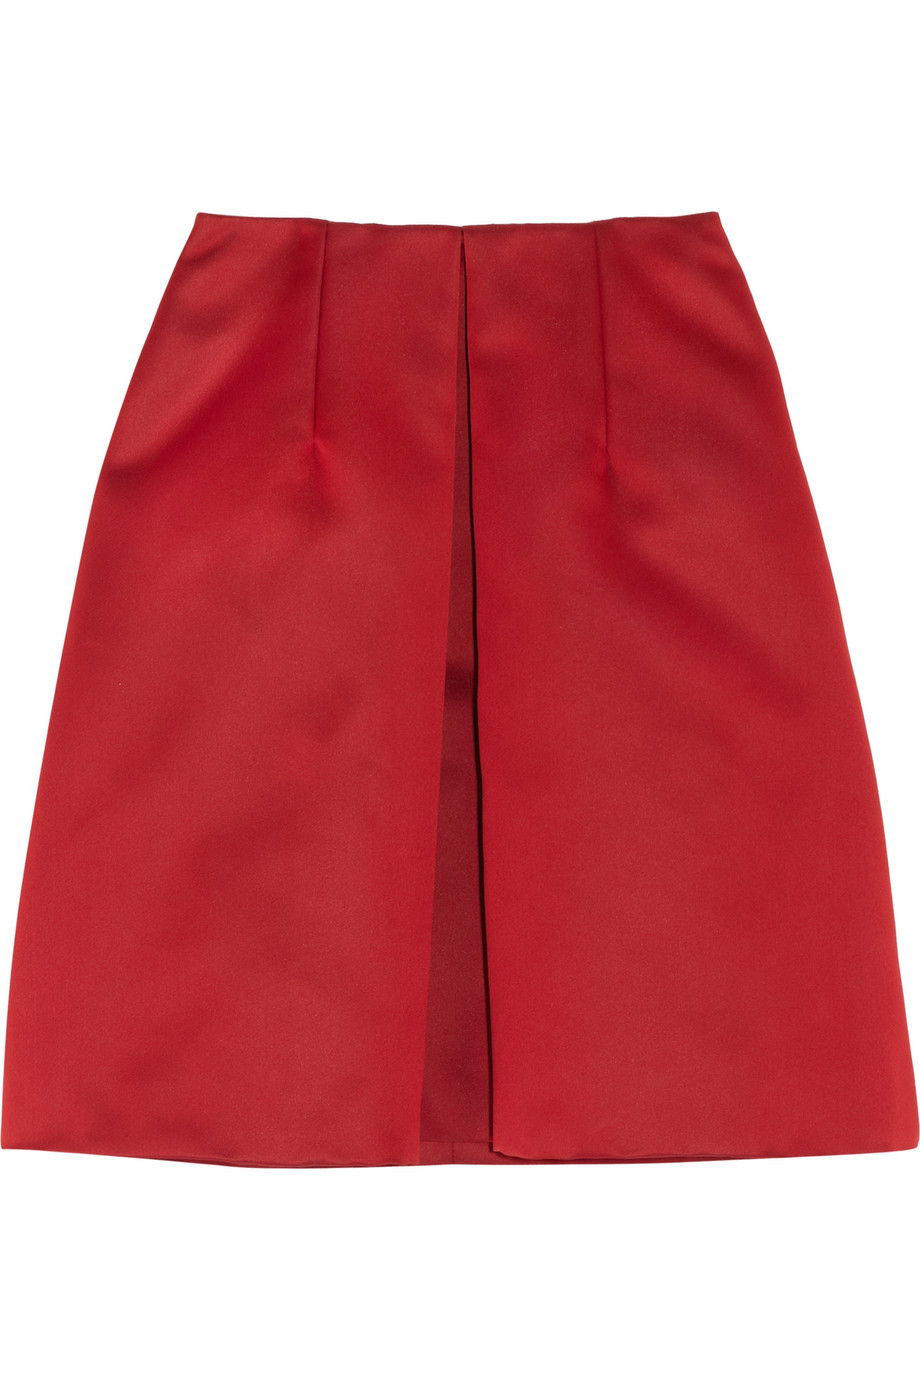 Carven Pleated Satin Skirt in Red | Lyst